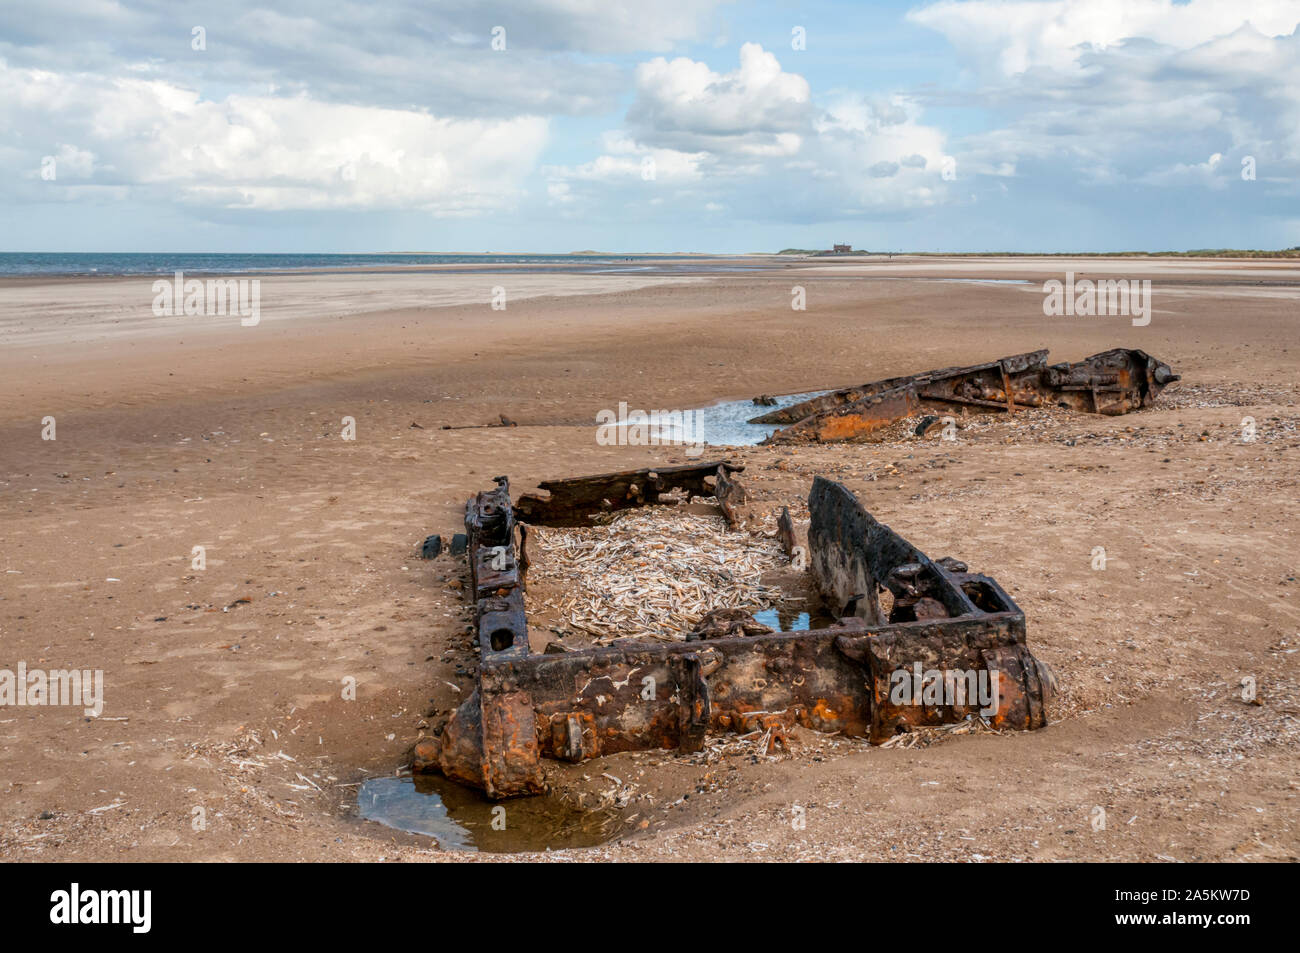 Remains of two tanks on beach at Titchwell, Norfolk, England. Stock Photo